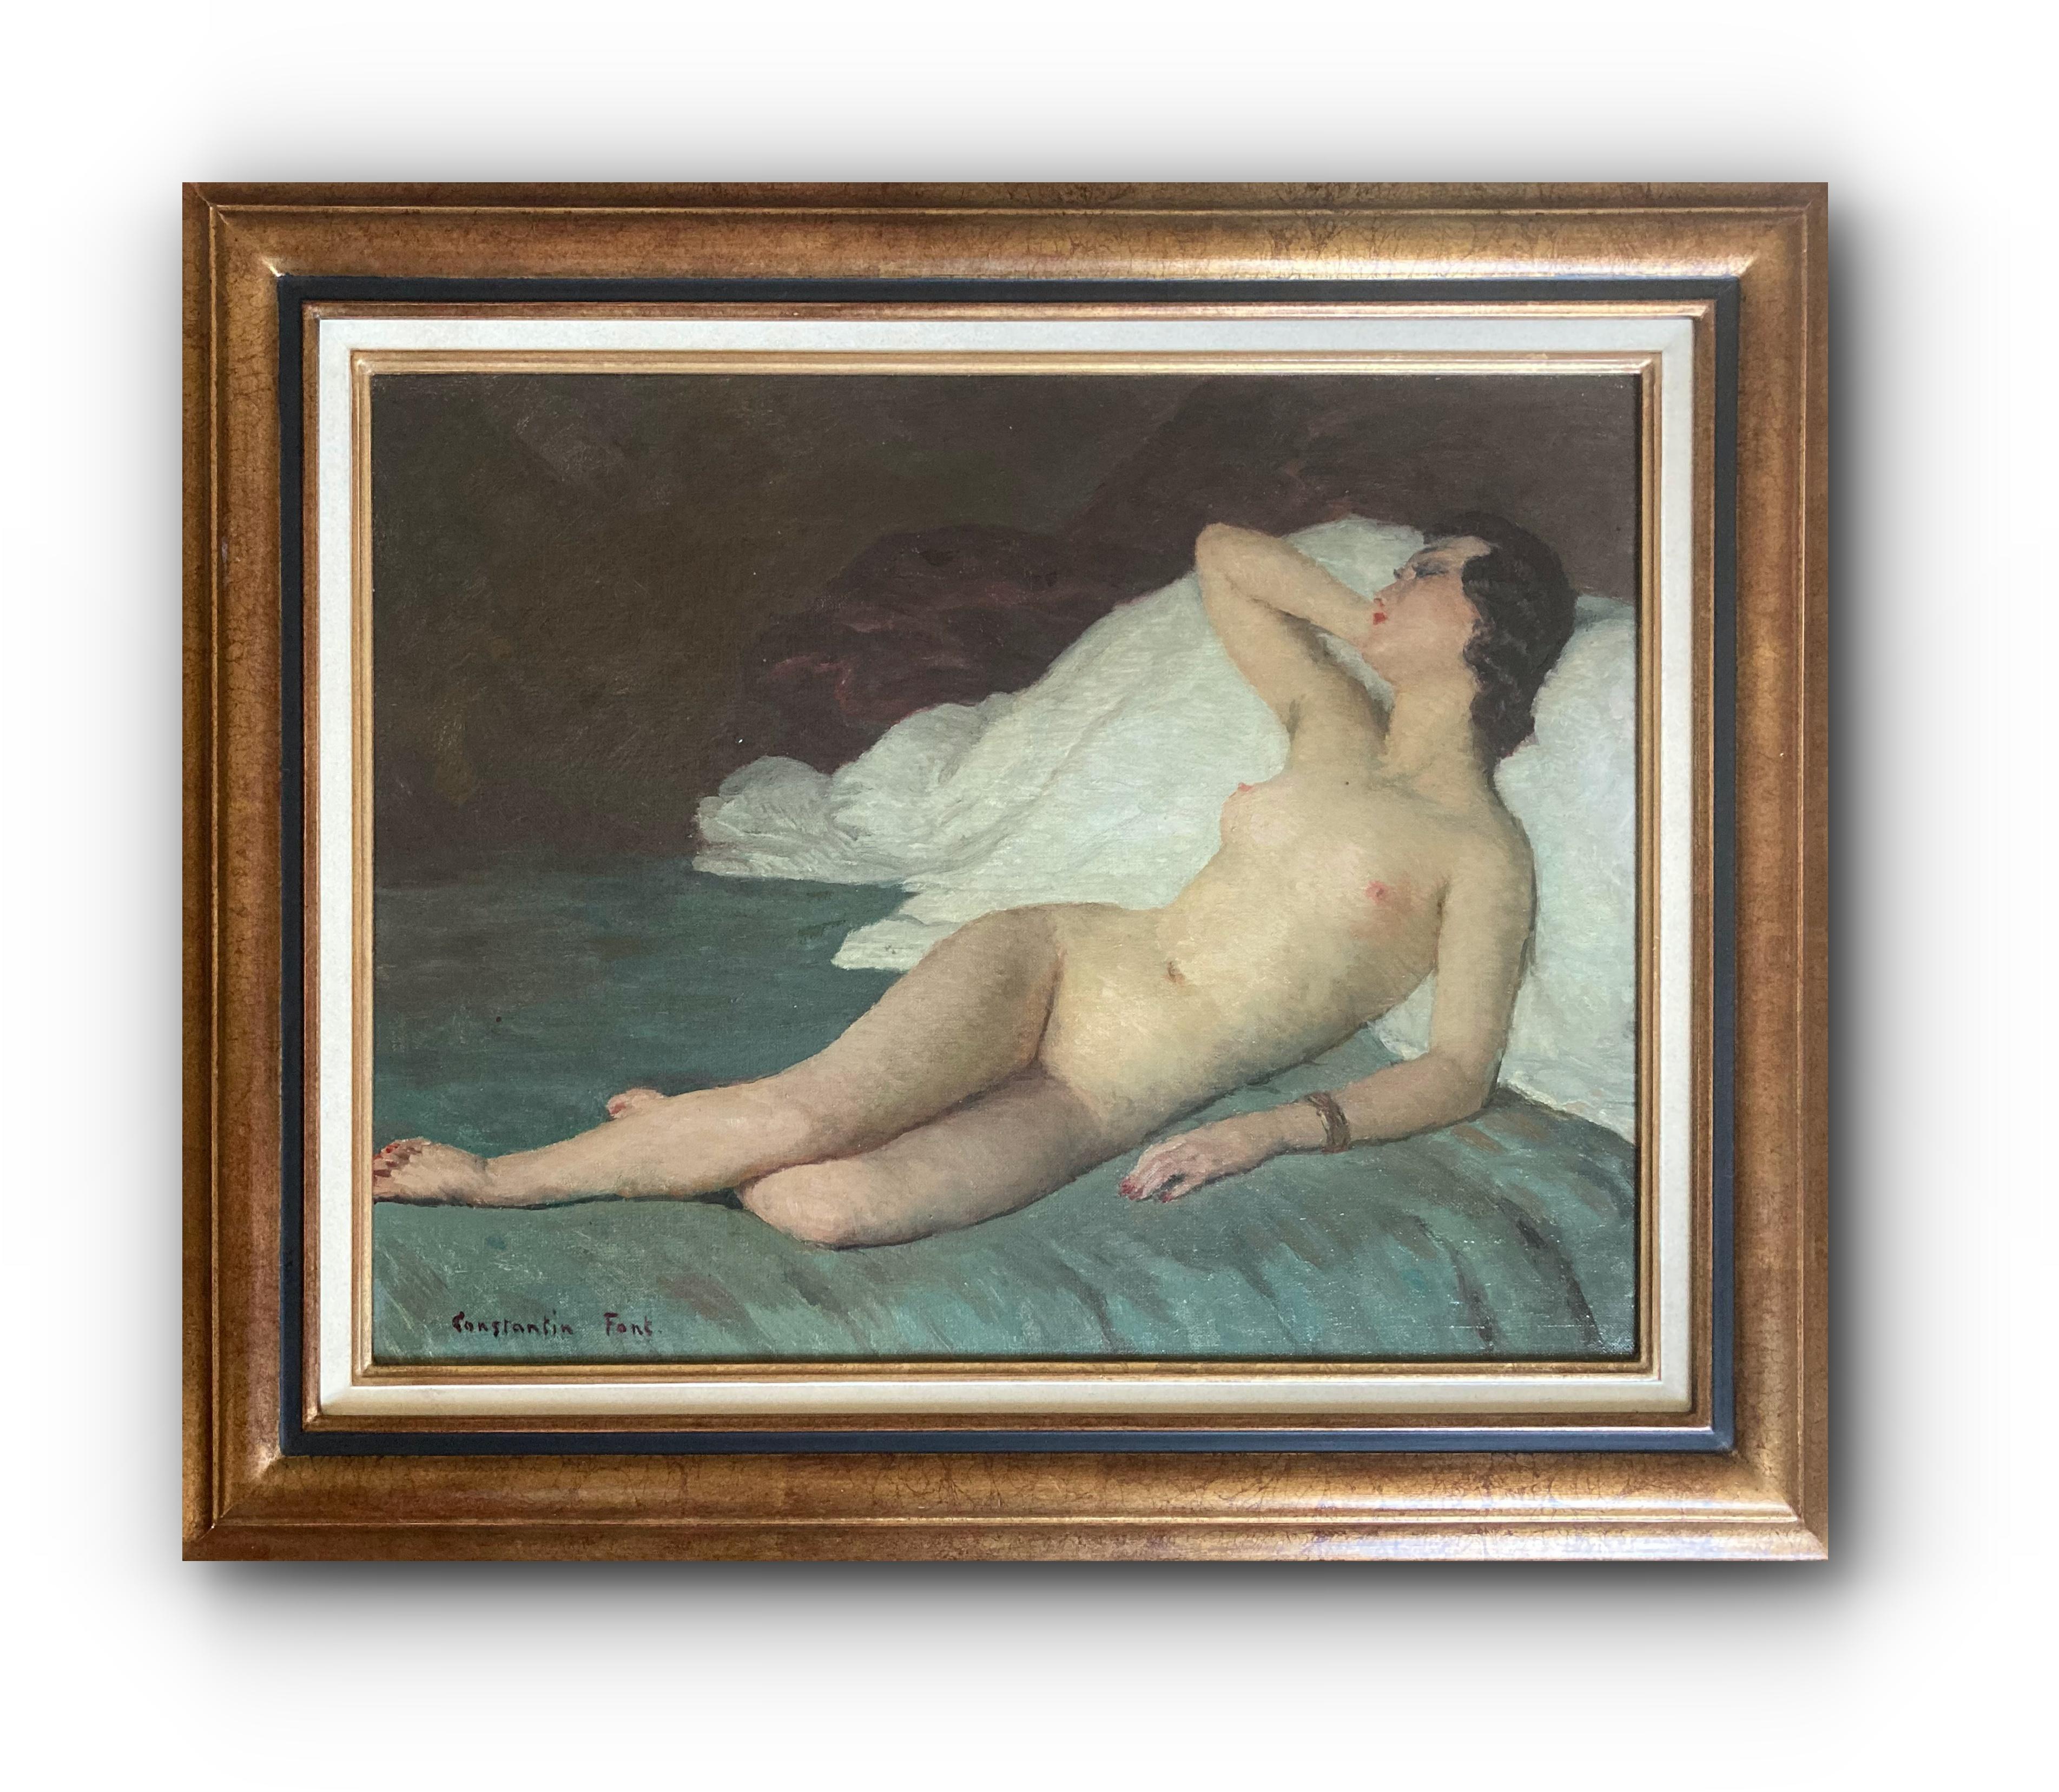 Constantin FONT Nude Painting - Reclining Nude (Framed Early 20th Century French Woman Portrait Painting)